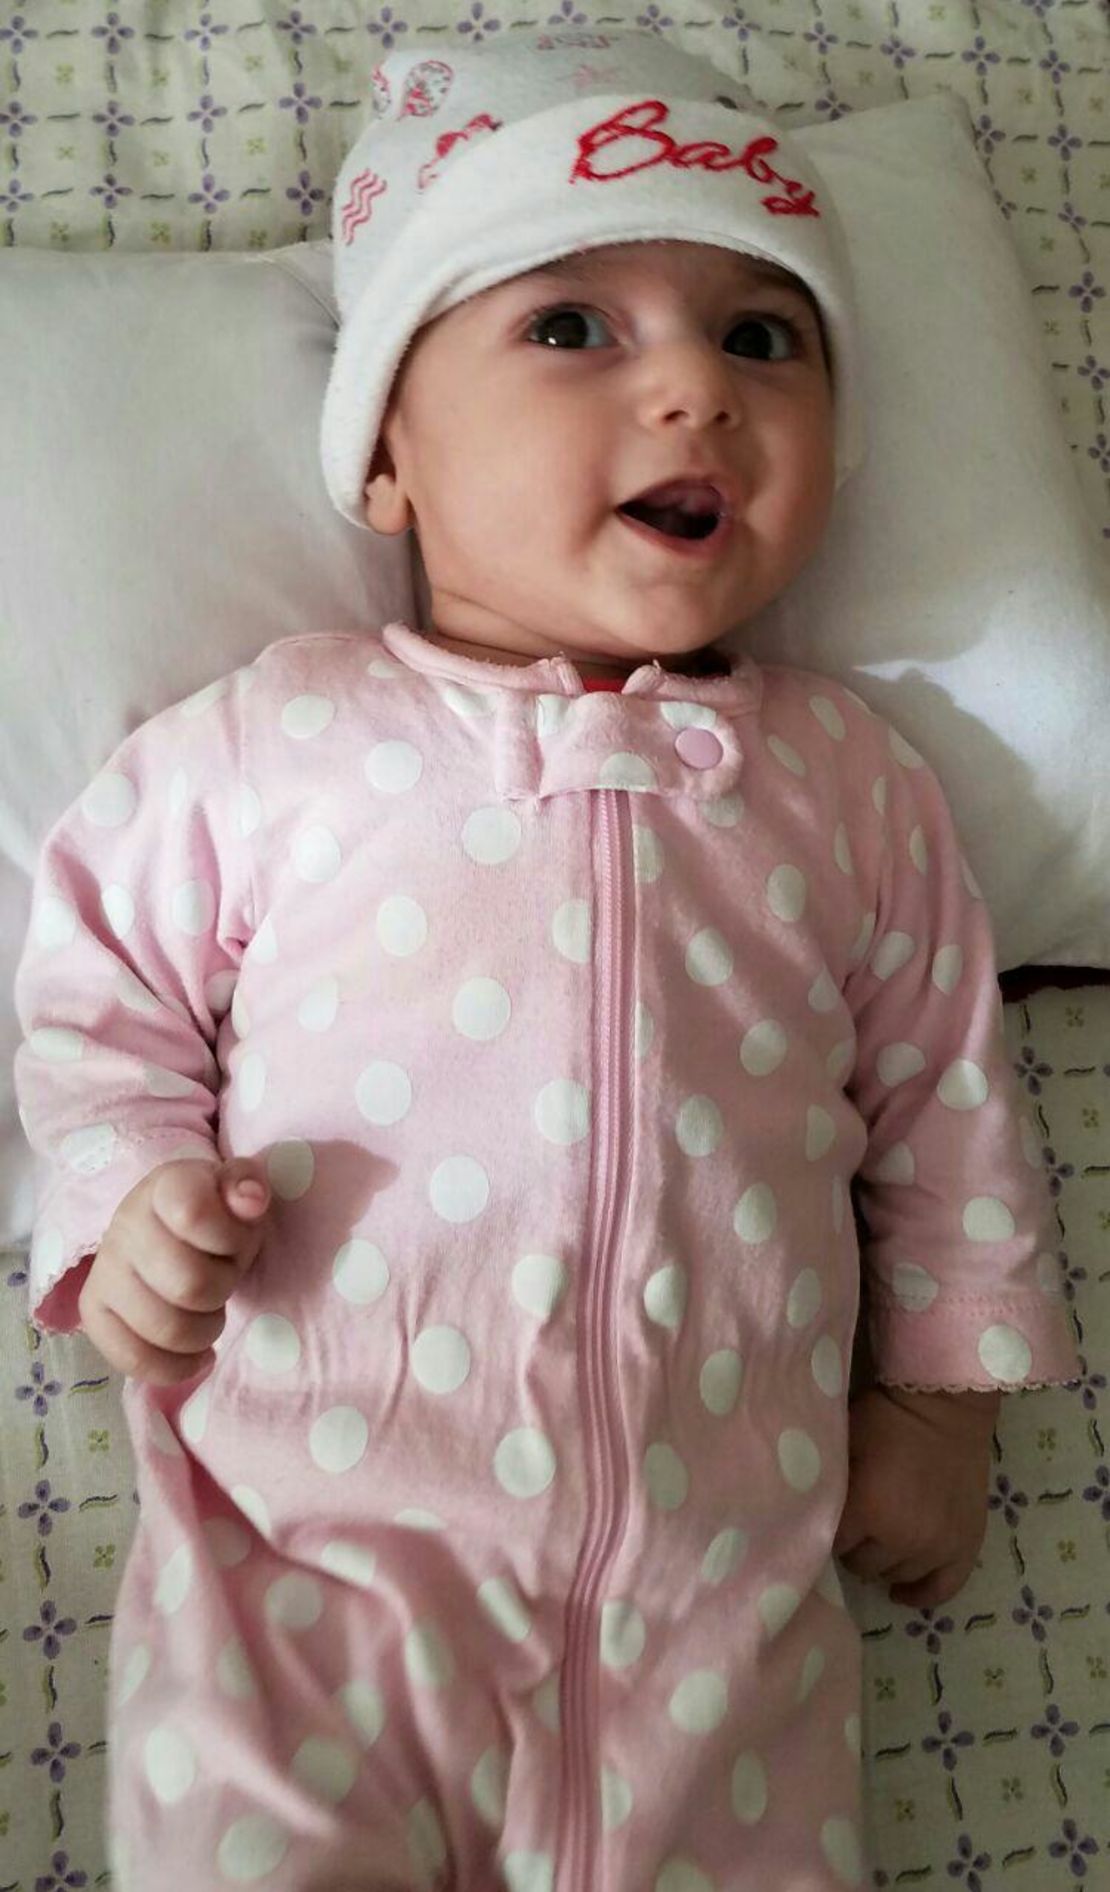 A 4-month-old Iranian girl arrived Tuesday at a Portland, Oregon hospital for life saving heart surgery after her family was denied a visa due to President Trump's travel ban